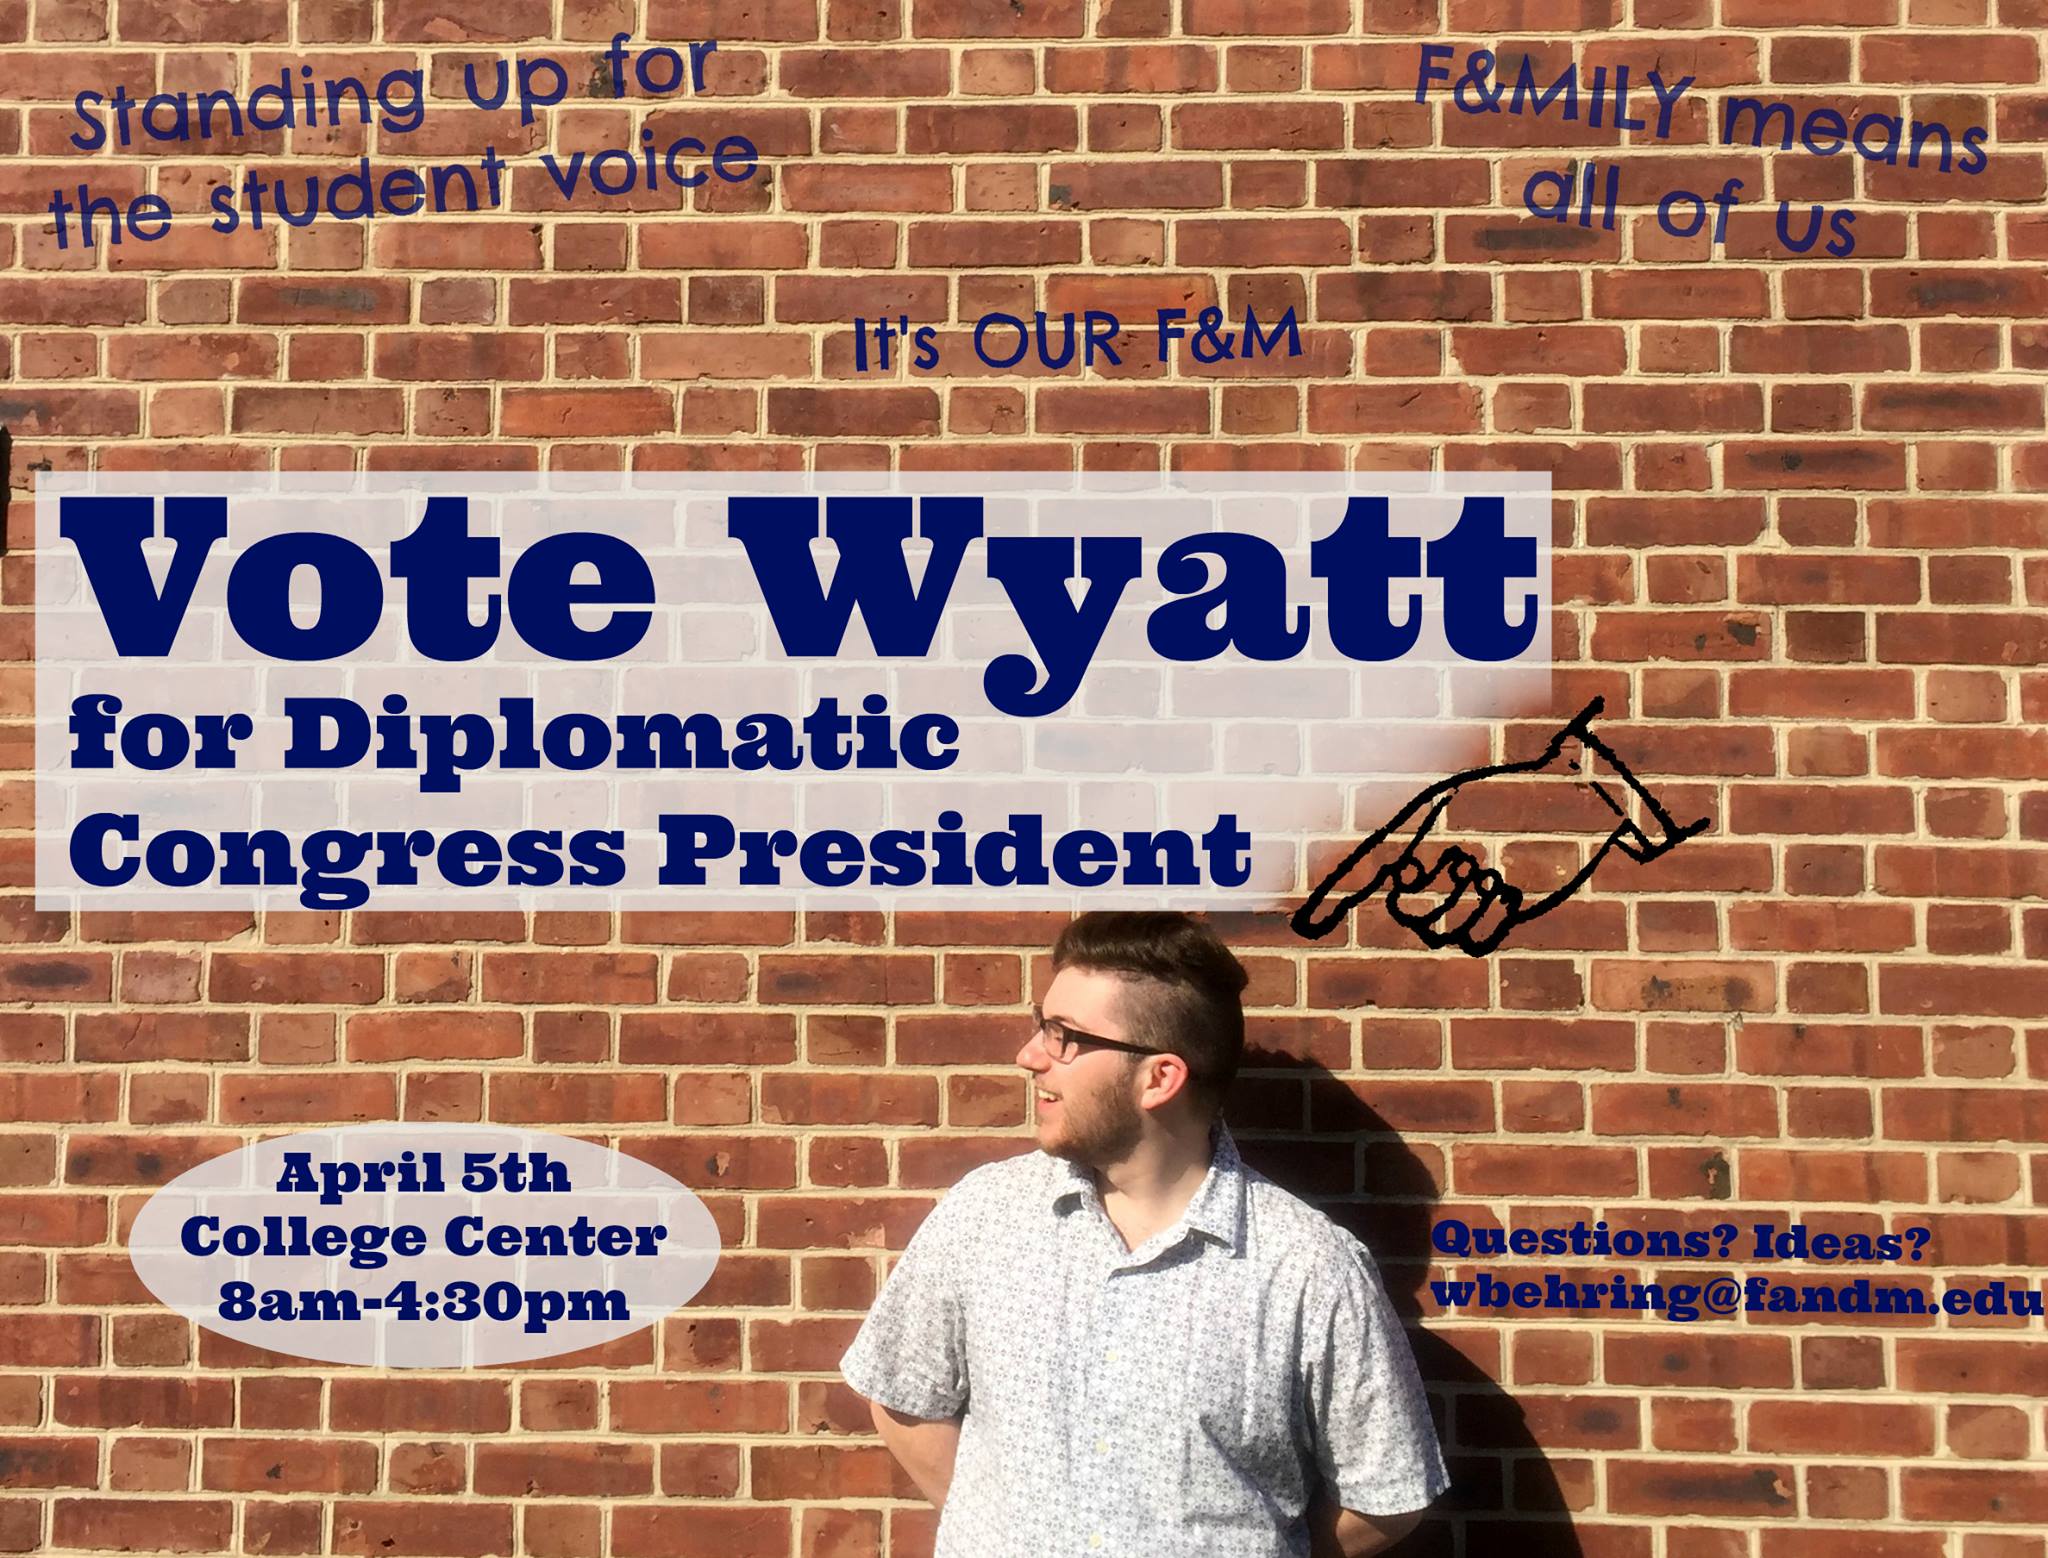 Wyatt Behringer ’18 was elected president of the Diplomatic Congress. He campaigned by using social media to broadcast his messages to students.